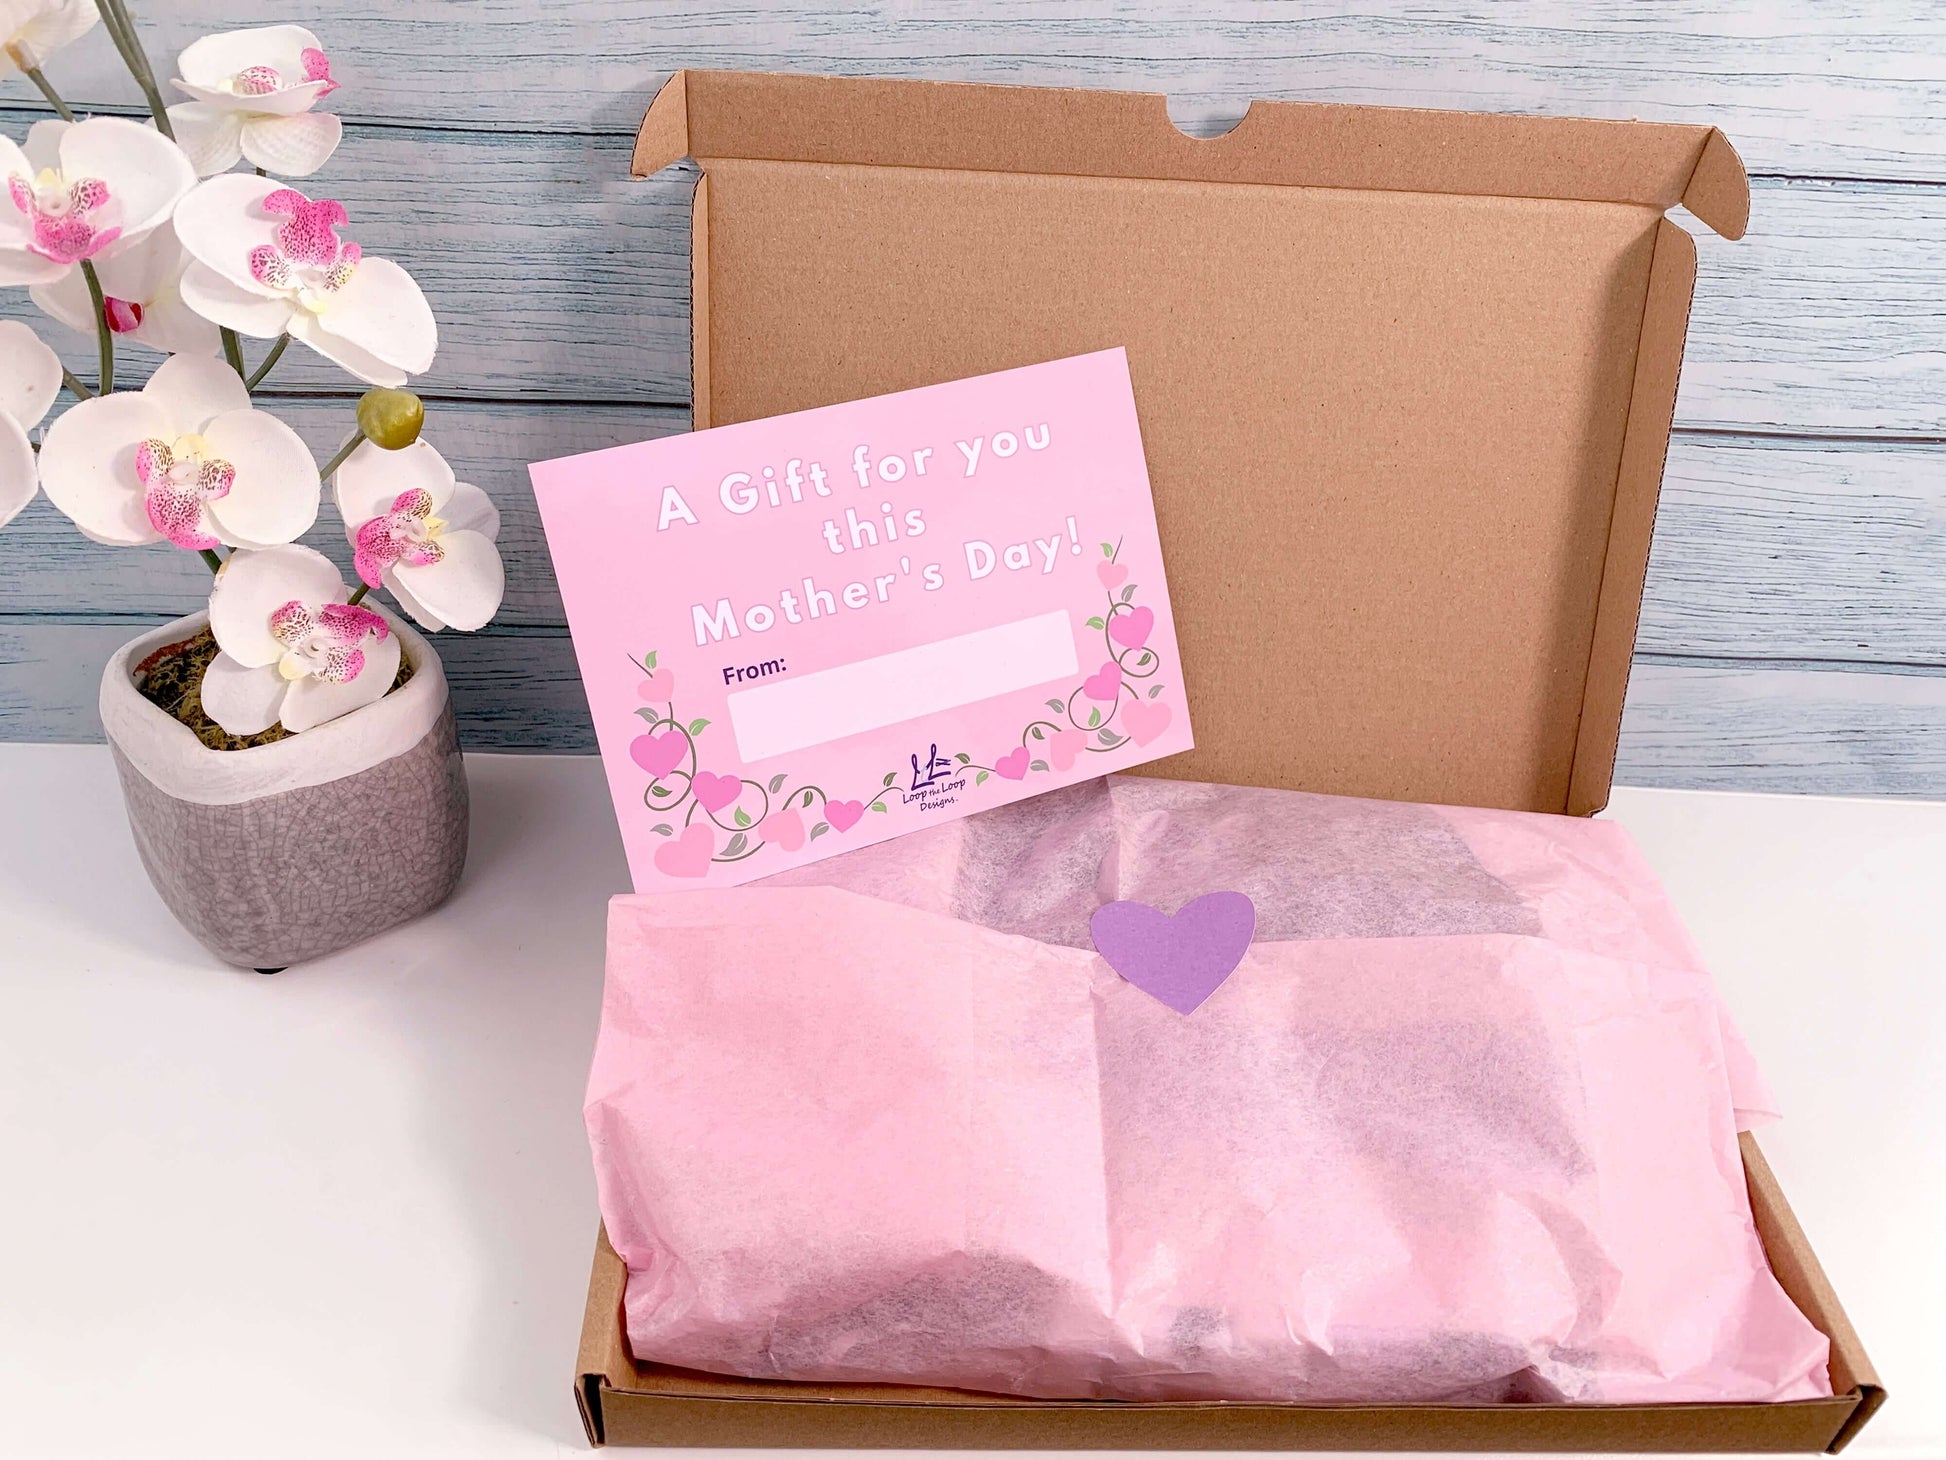 Gift wrapped with pink tissue paper and purple heart sticker to Close. Gift slip pink background design with wording A gift for you this Mothers Day heart shape pink flowers ona vine below, and blank white box to add from: ....... Loop the Loop Designs logo bottom centre. Pink orchid faux plant to right of giftset box